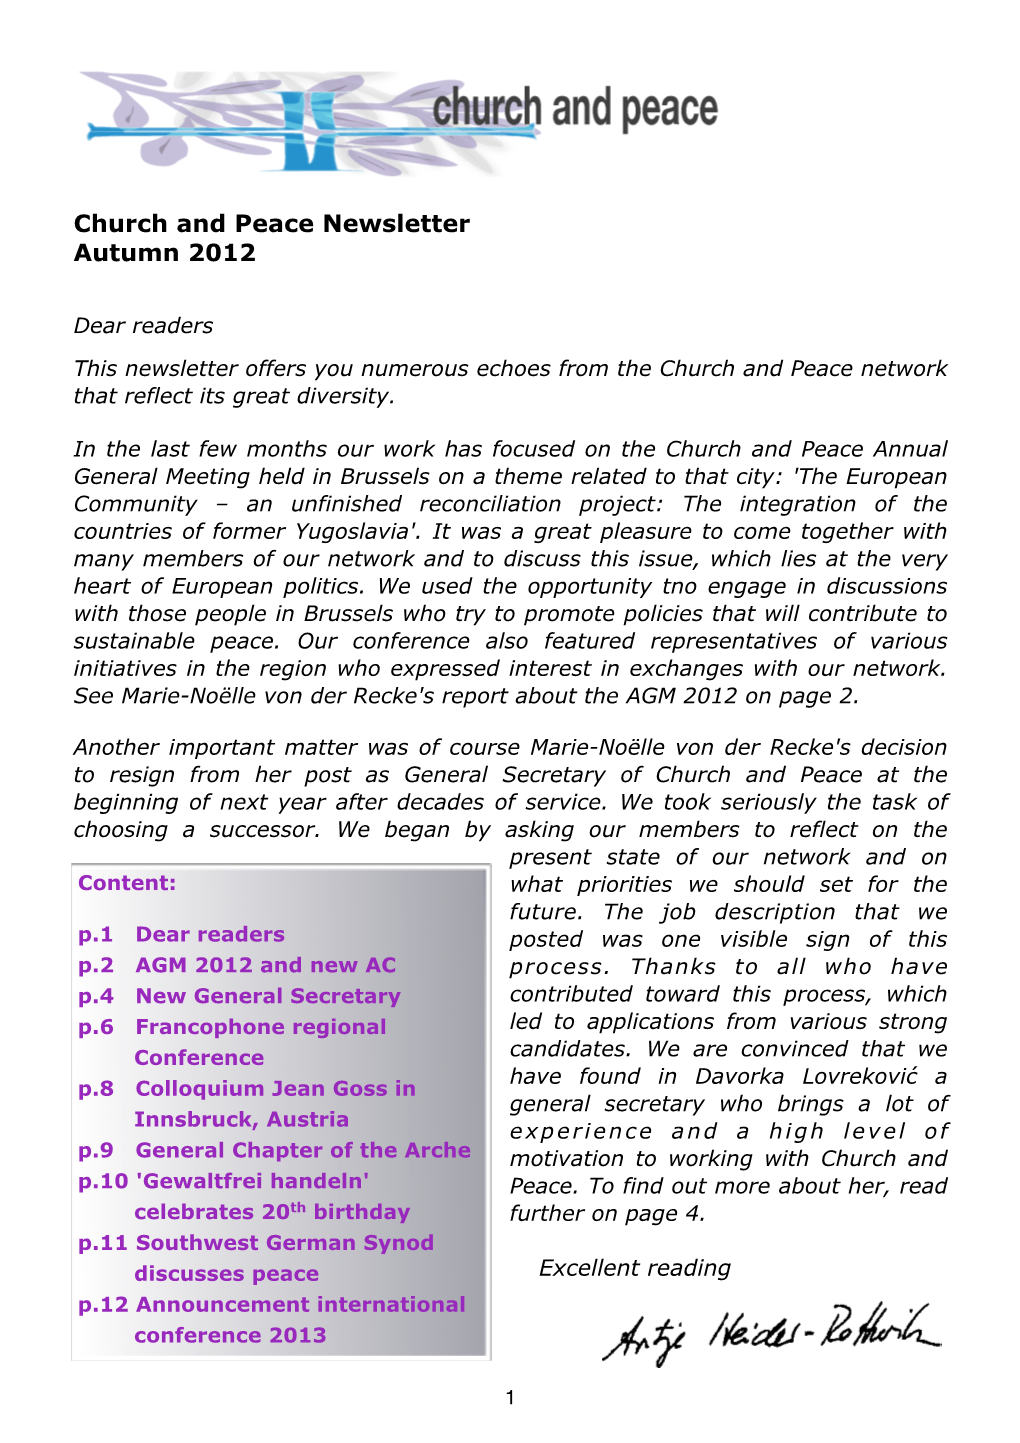 Church and Peace Newsletter Autumn 2012